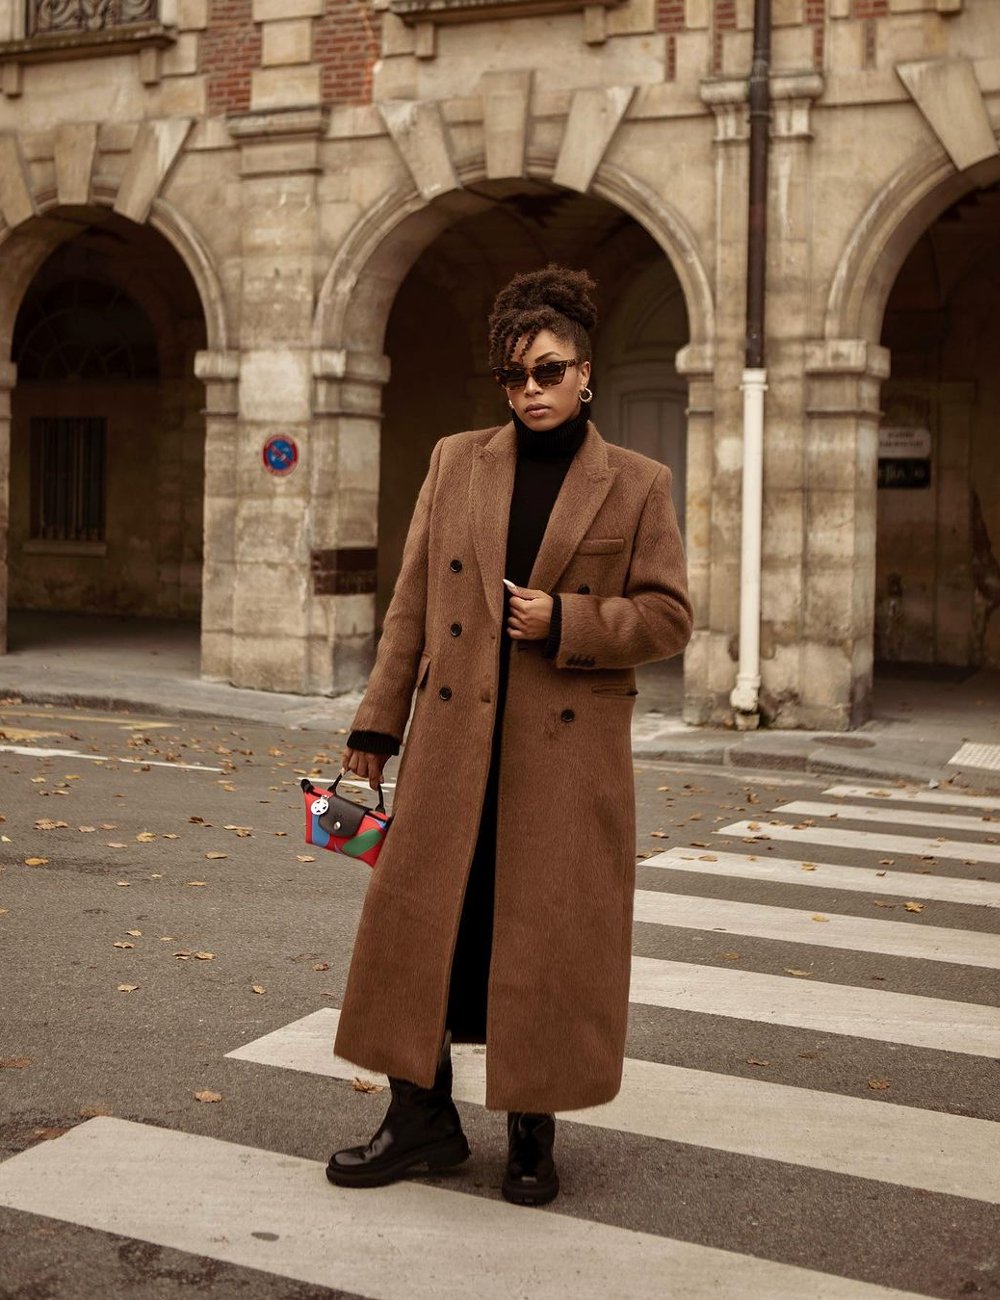 Ellie Delphine - casaco - trench coat - inverno - street style - https://stealthelook.com.br